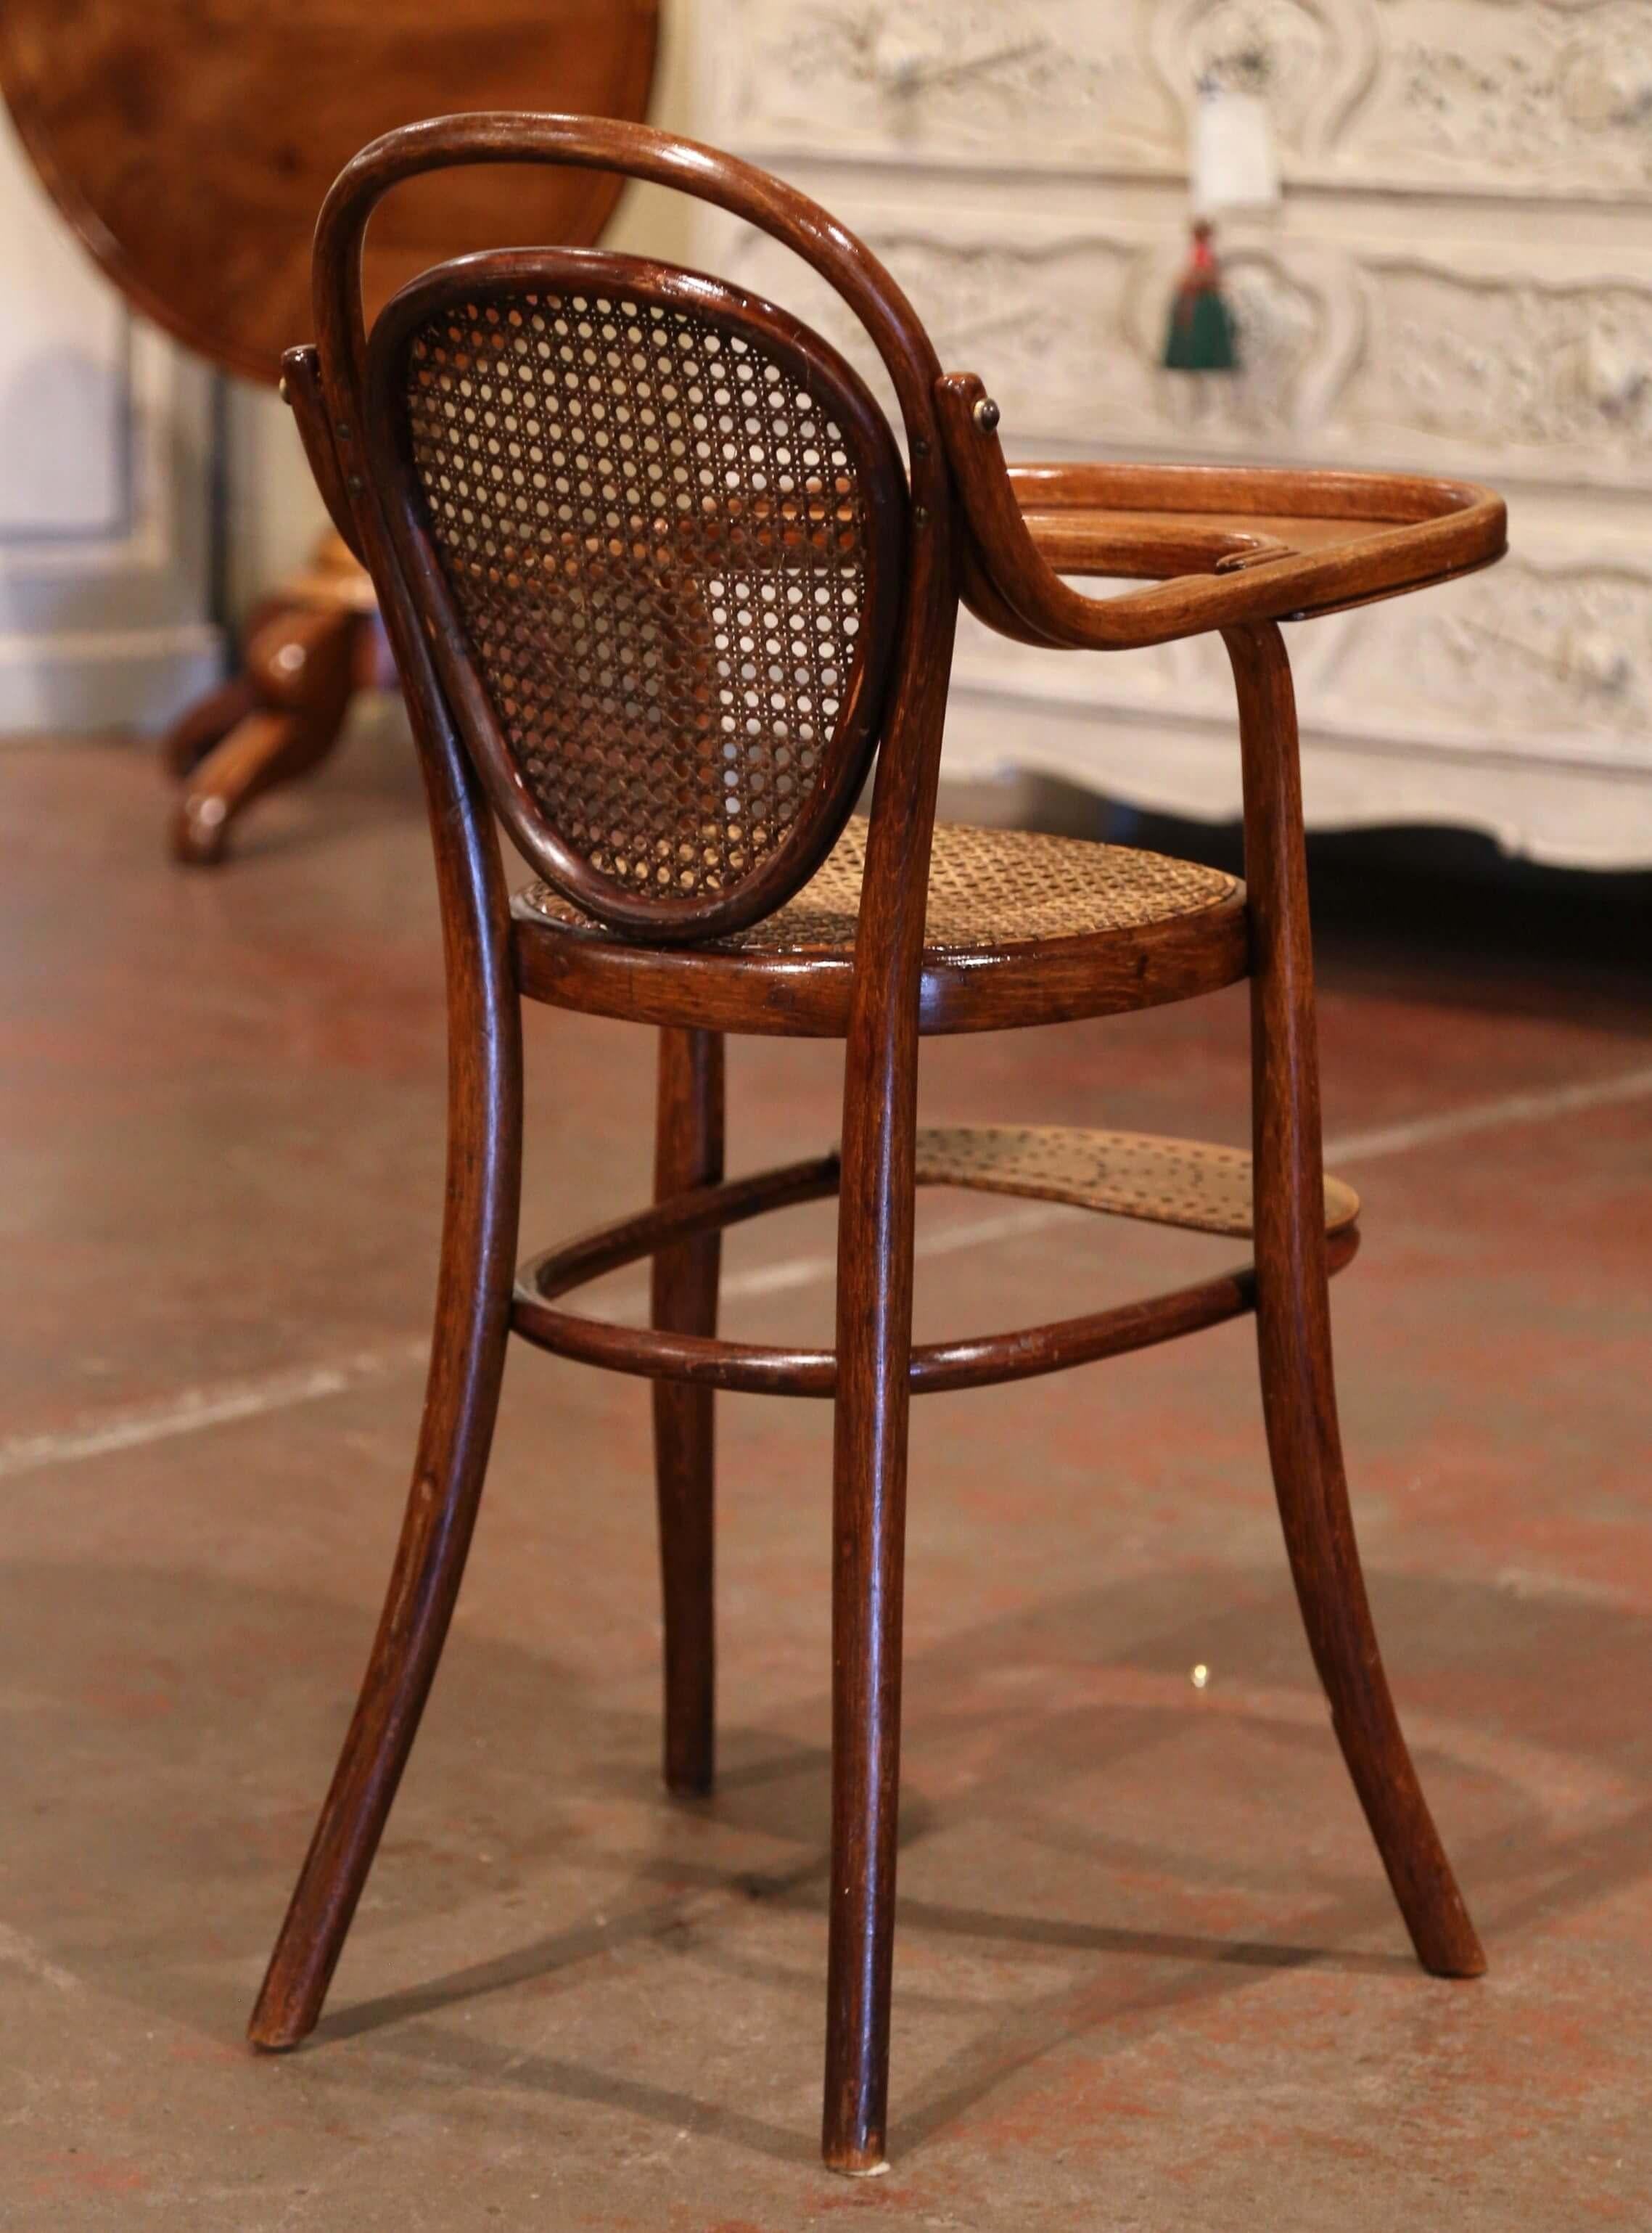 Early 20th Century French Bentwood and Cane High Baby Chair by M. Thonet For Sale 4